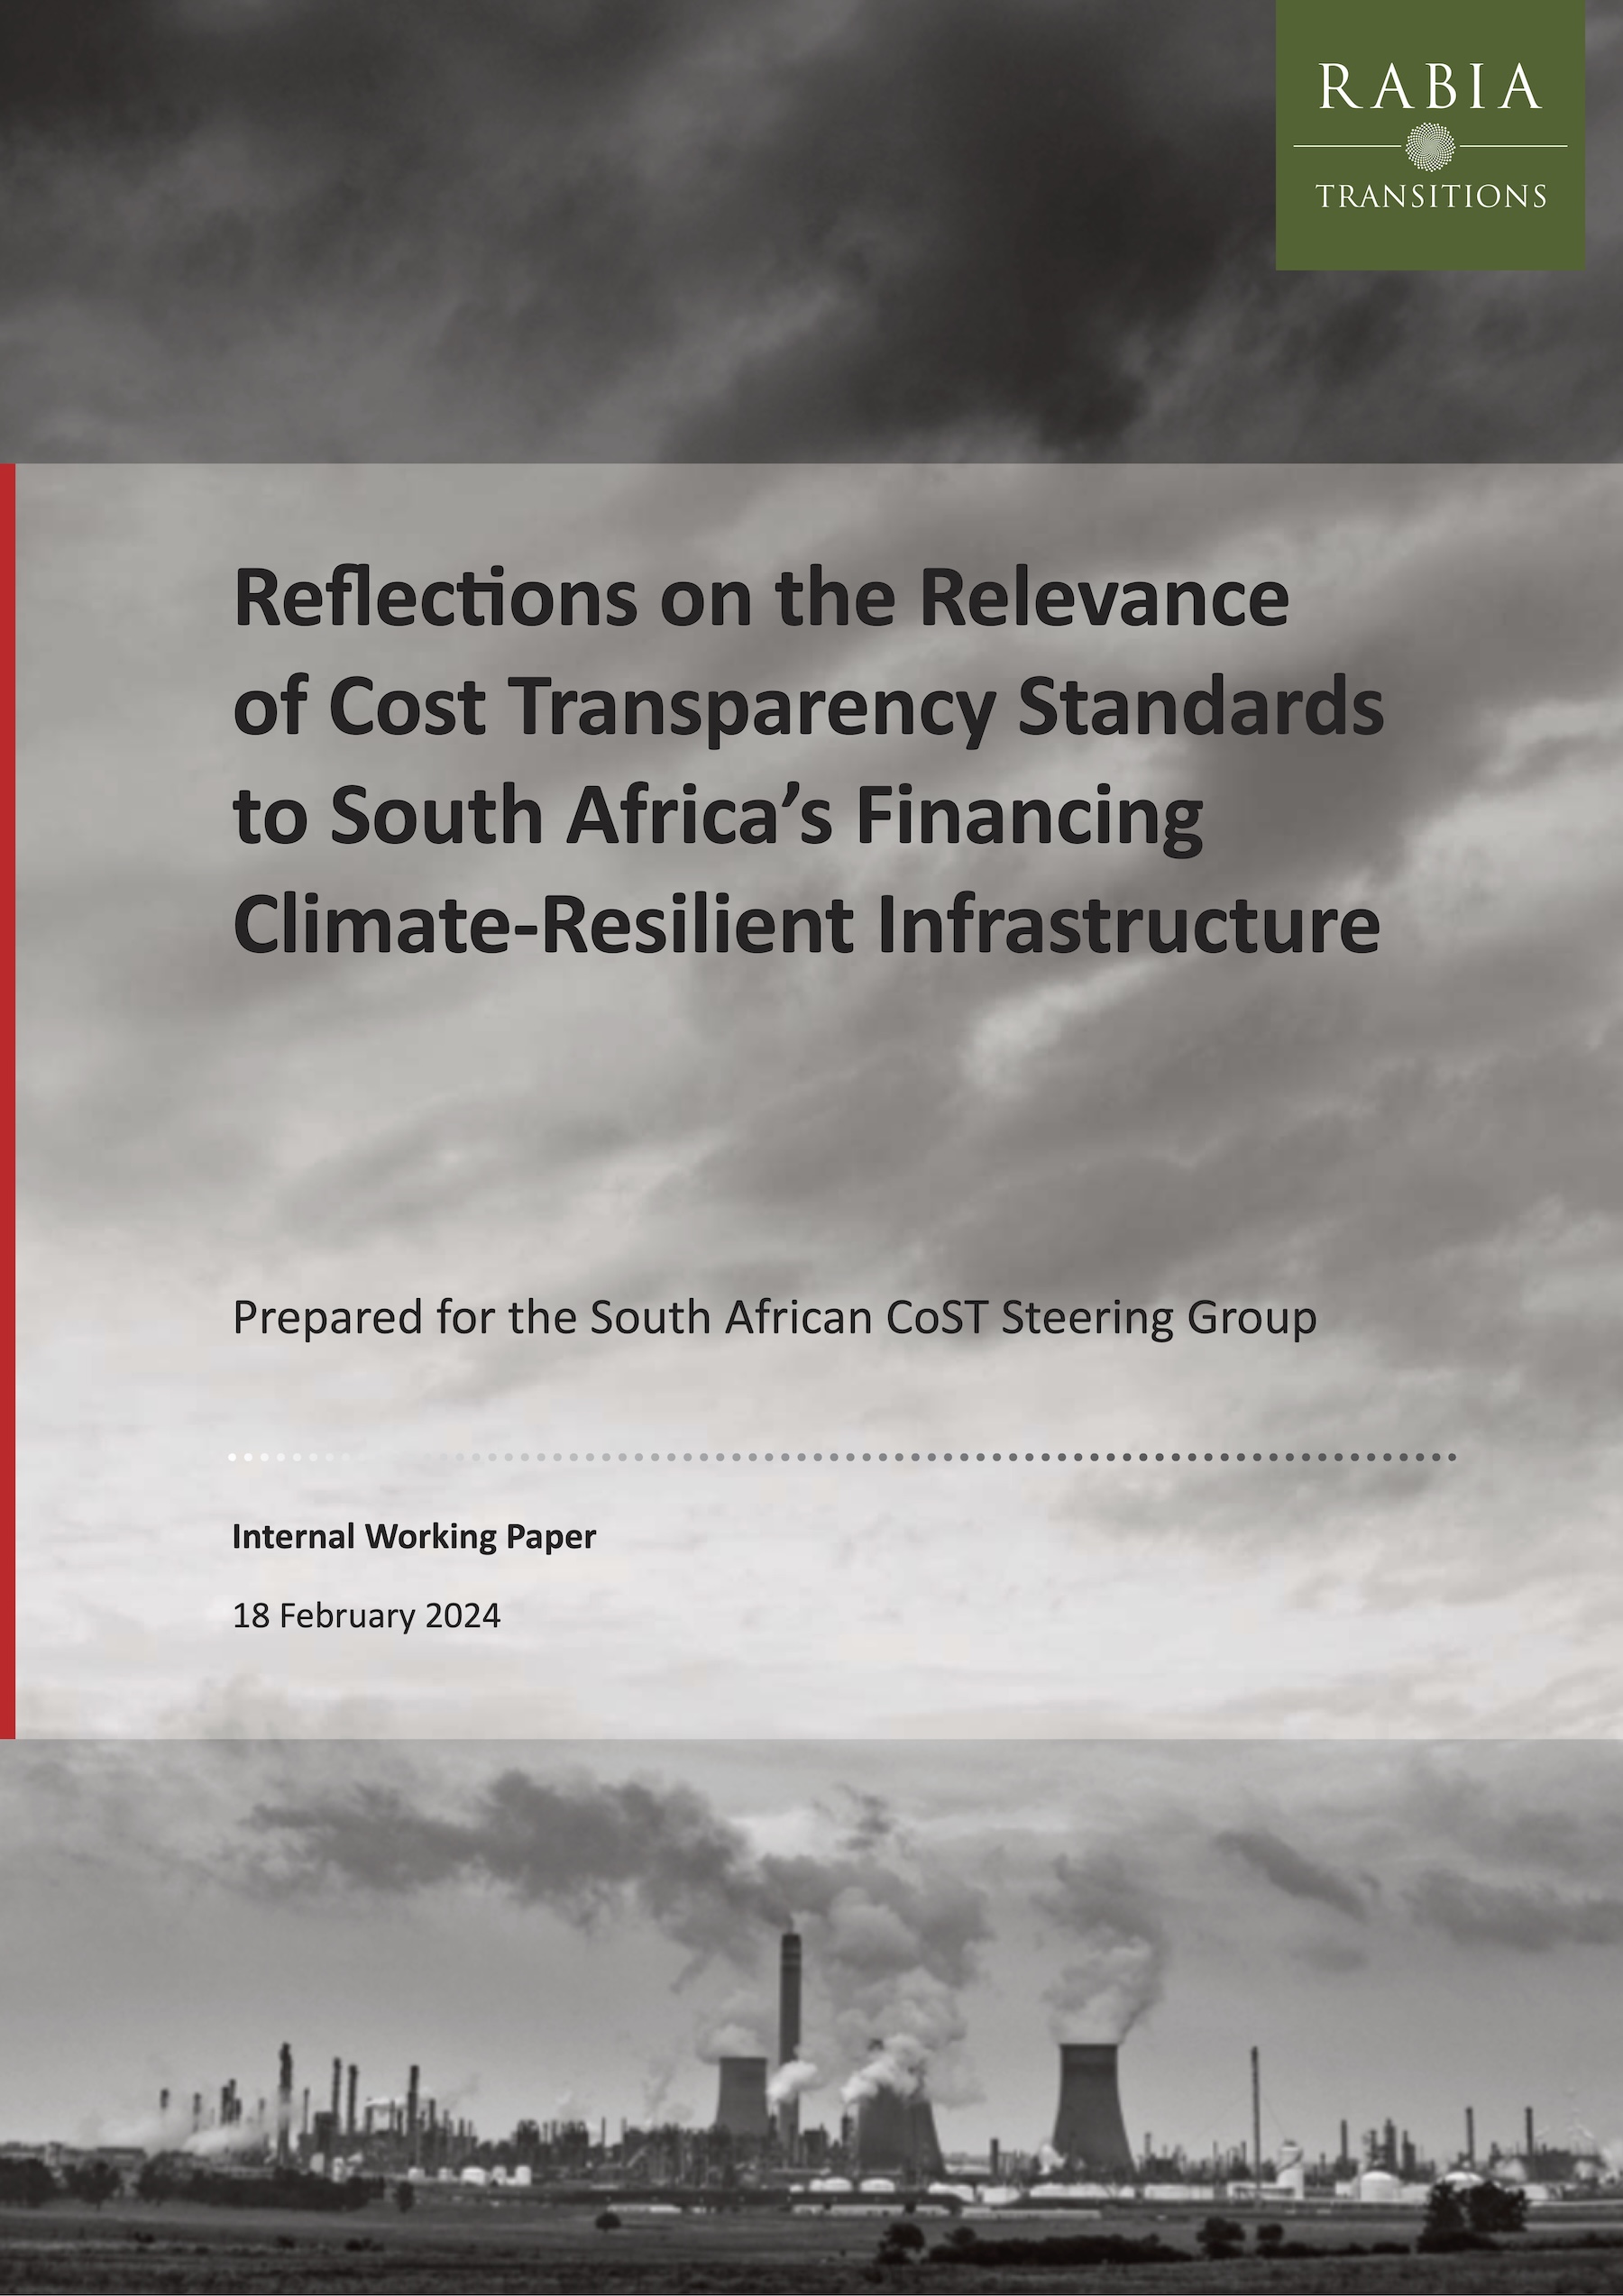 Reflections on the Relevance of Cost Transparency Standards to South Africa’s Financing Climate-Resilient Infrastructure